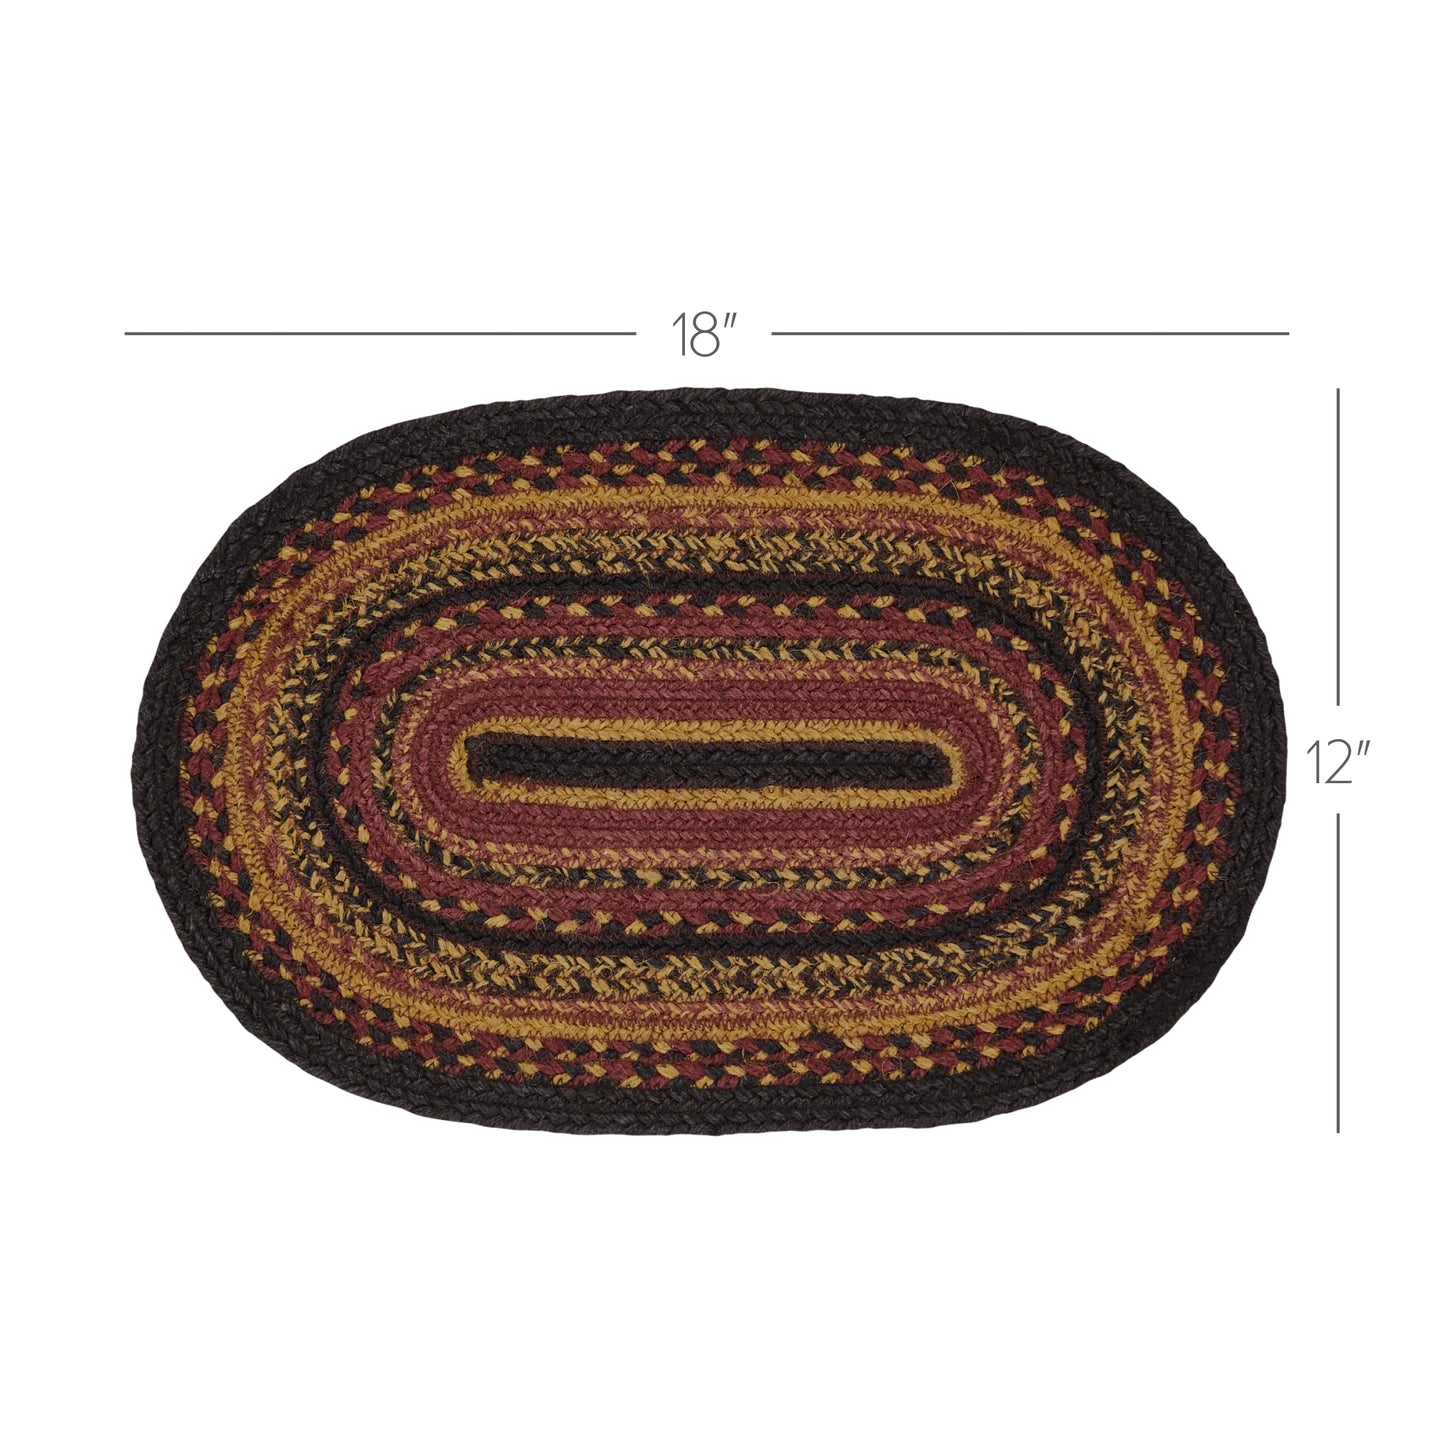 81363-Heritage-Farms-Jute-Oval-Placemat-12x18-image-1